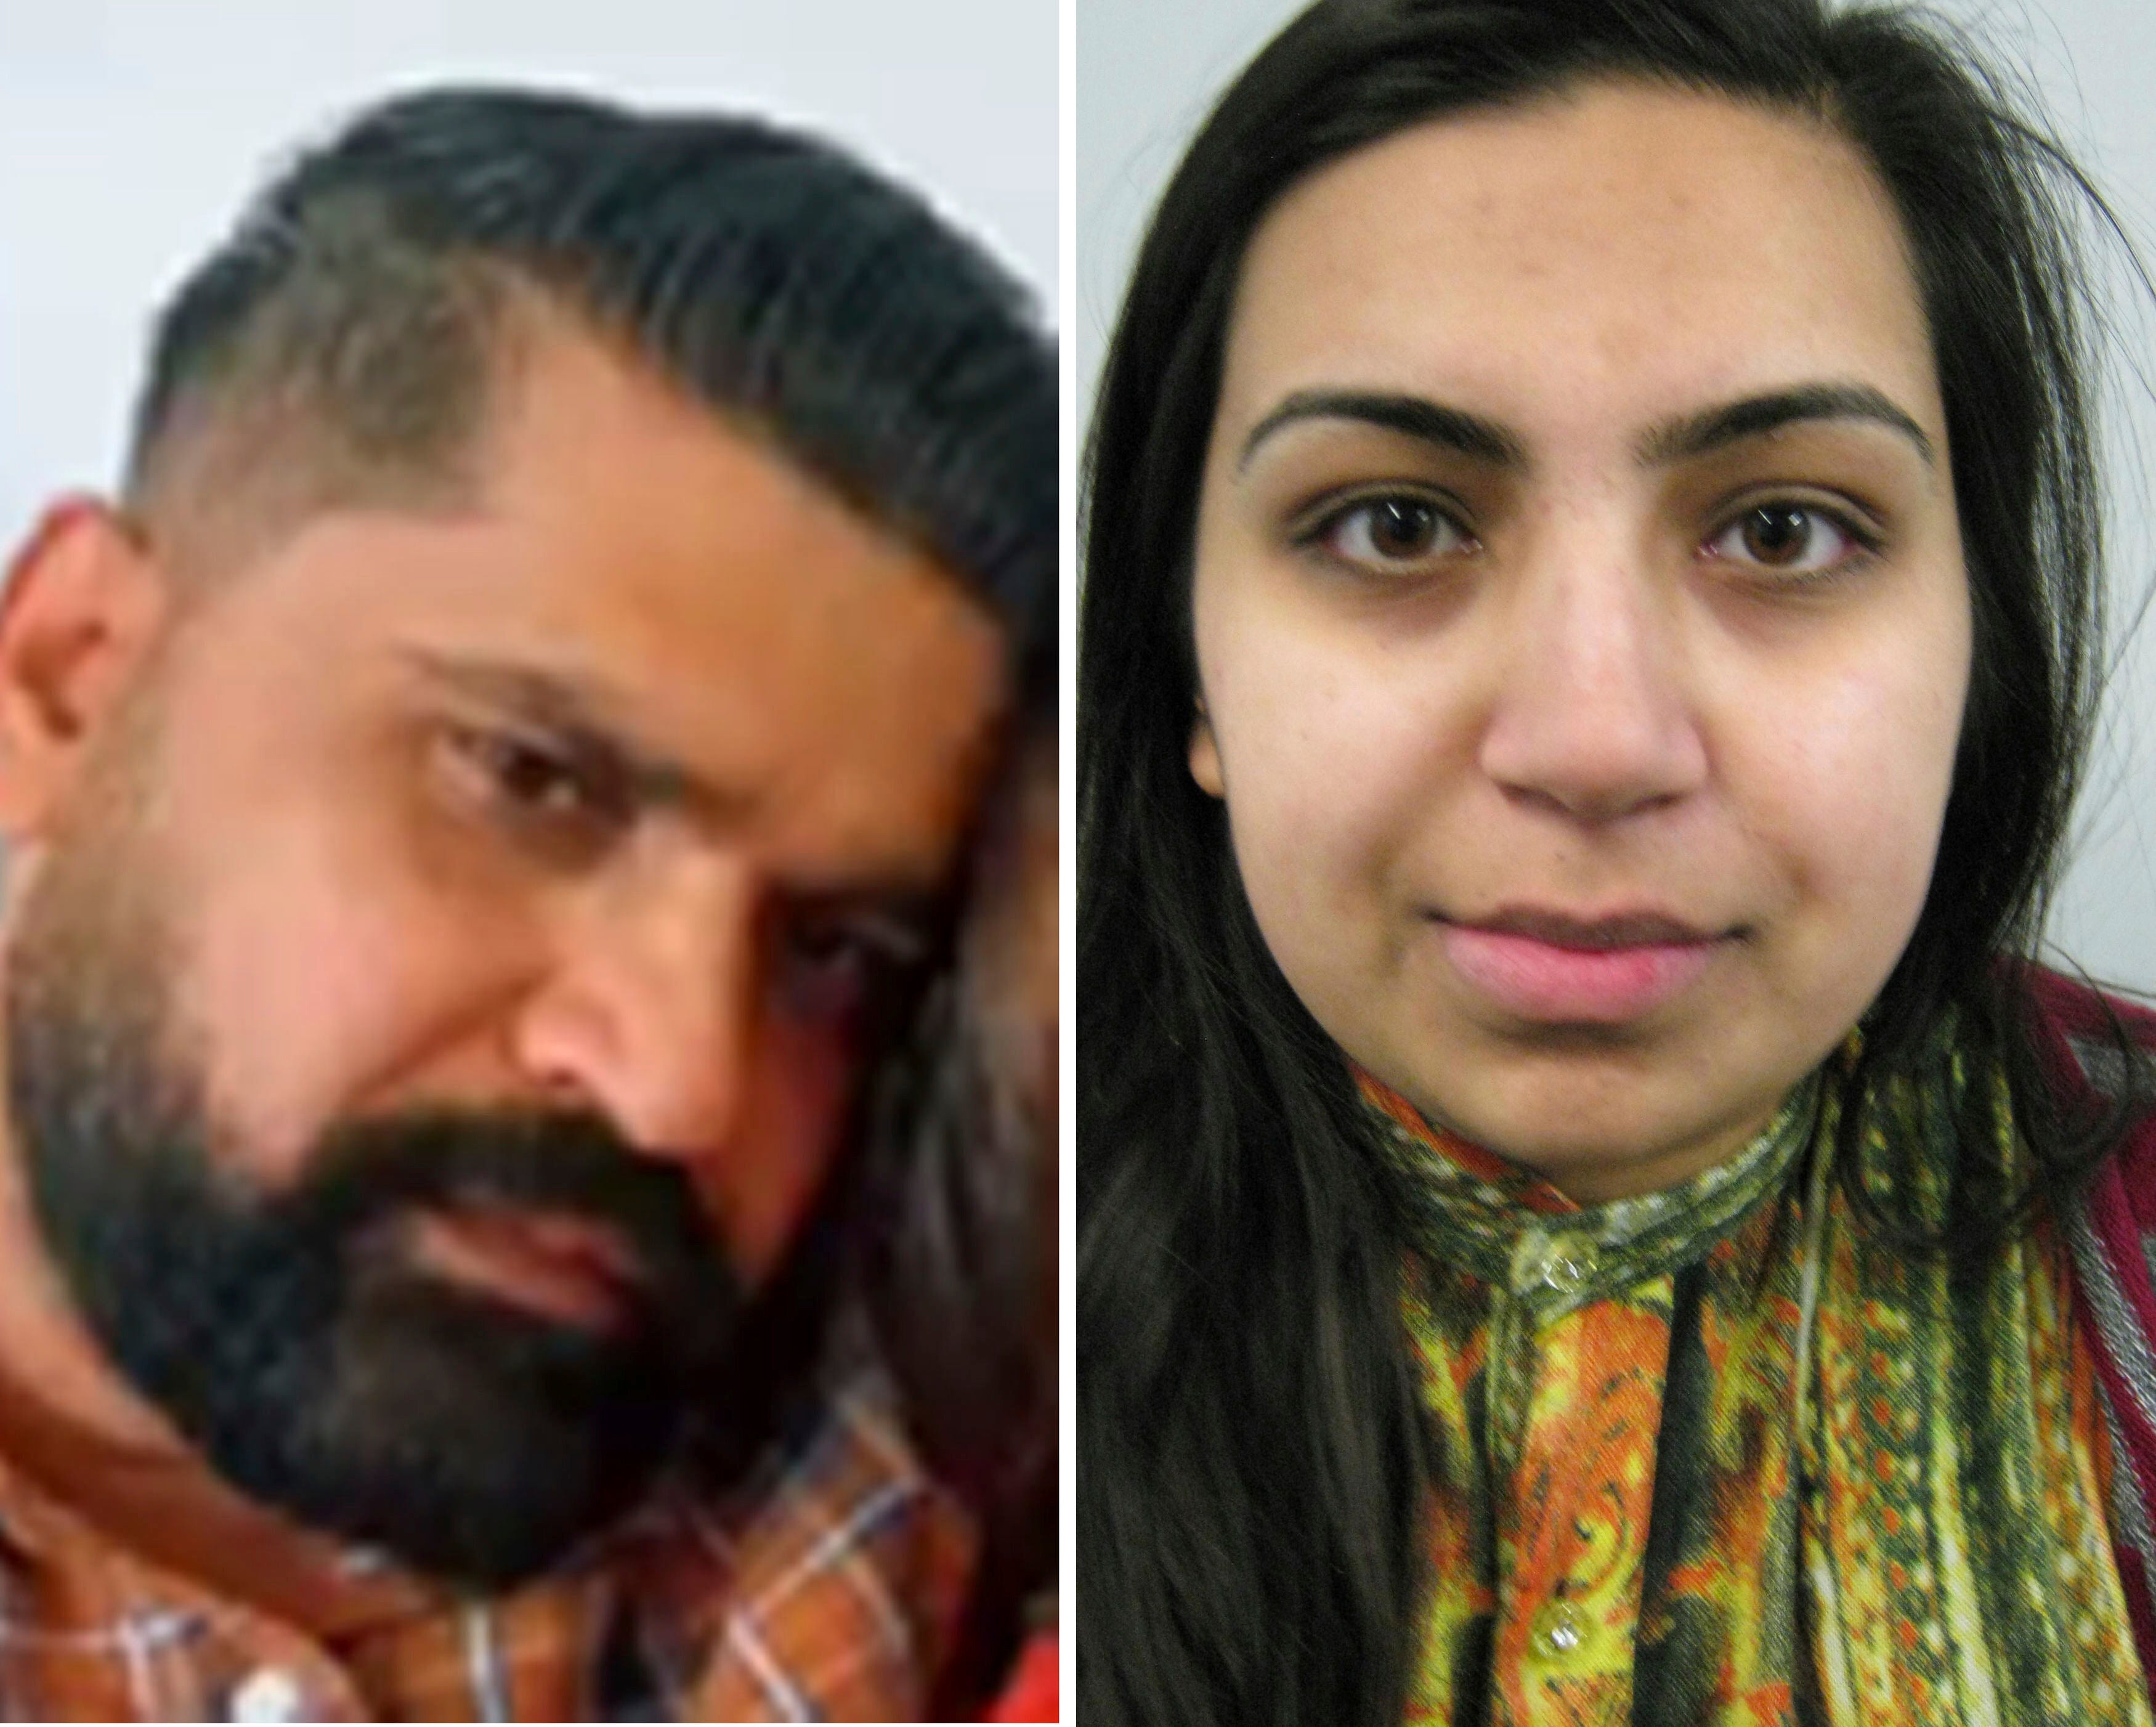 Urfan Sharif, left and Beinash Batool, right, are being sought by police